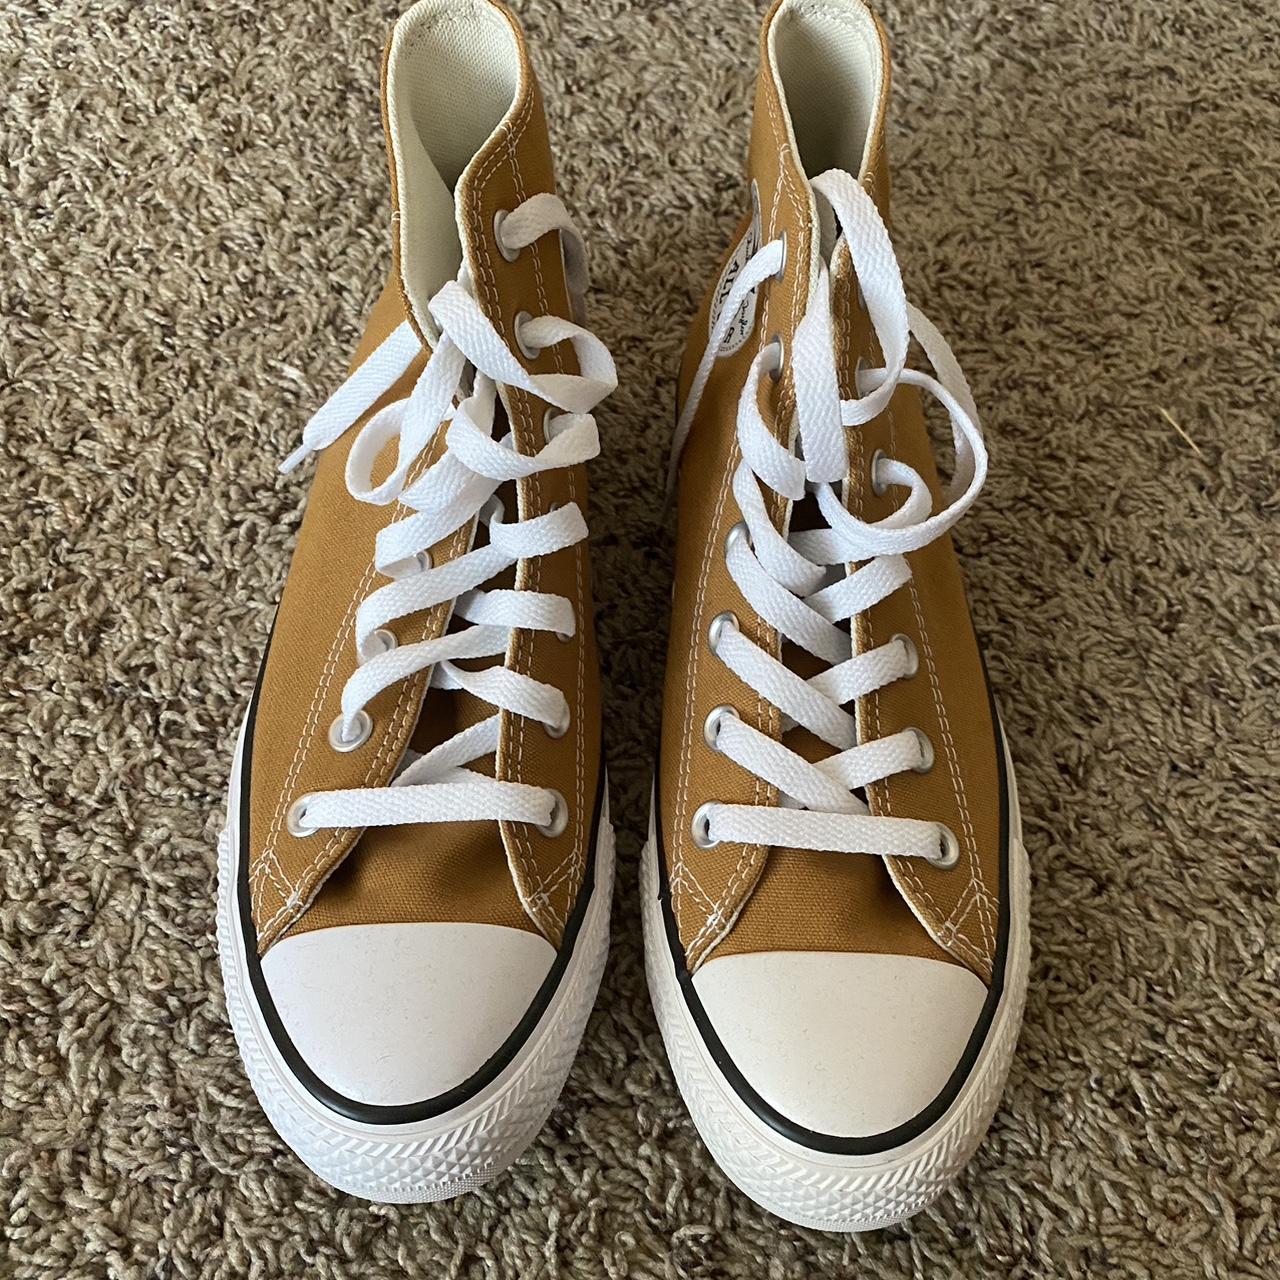 Converse Women's Yellow and White Trainers